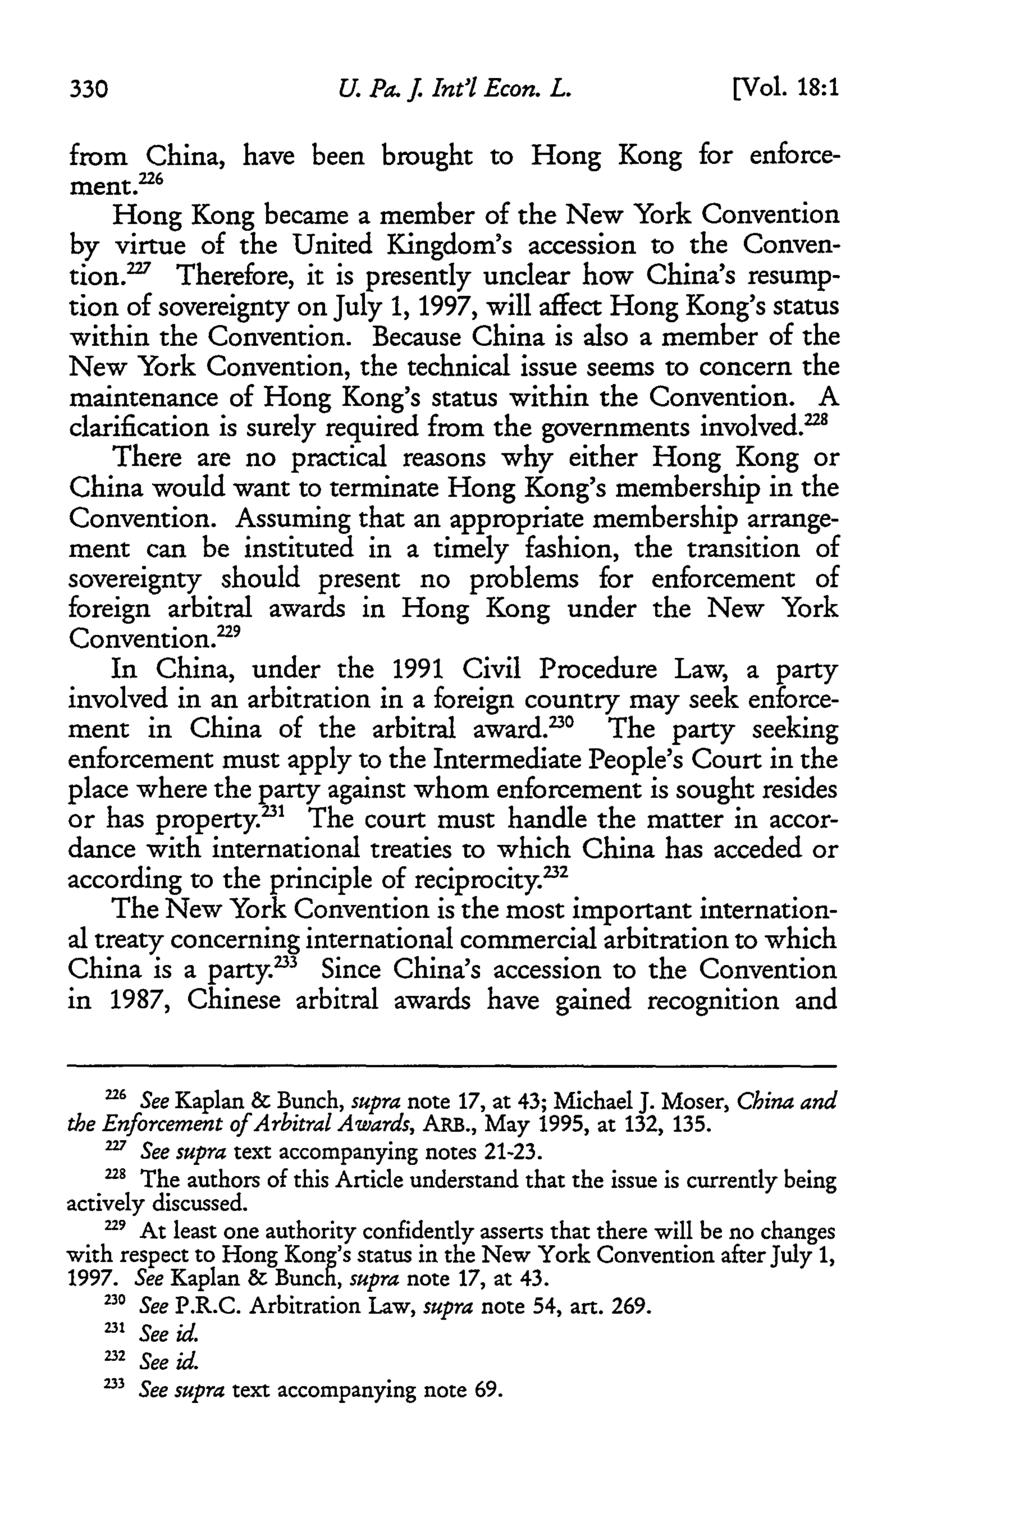 University of Pennsylvania Journal of International Law, Vol. 18, Iss. 1 [2014], Art. 13 U. Pa. j Int'l Econ. L. [Vol. 18:1 from China, have been brought to Hong Kong for enforcement.